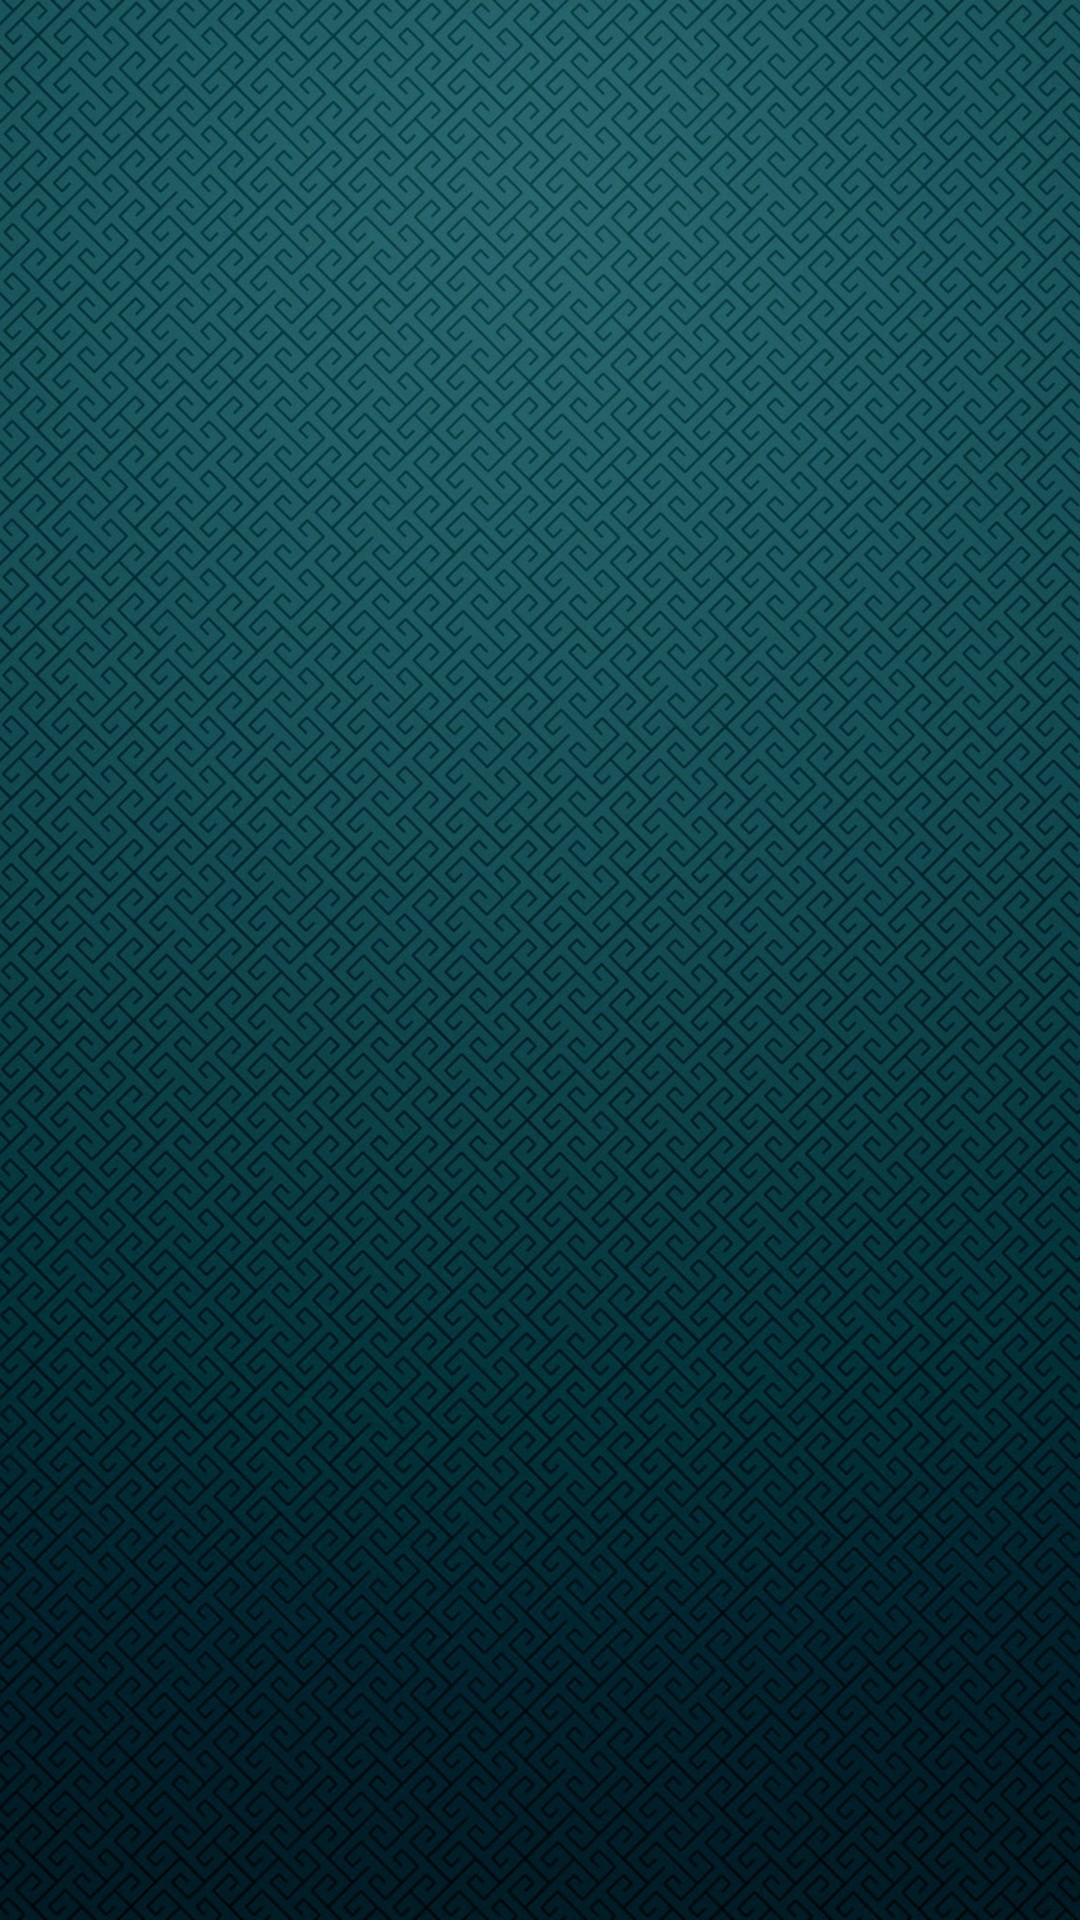 Teal Green Wallpaper For Android with image resolution 1080x1920 pixel. You can make this wallpaper for your Android backgrounds, Tablet, Smartphones Screensavers and Mobile Phone Lock Screen